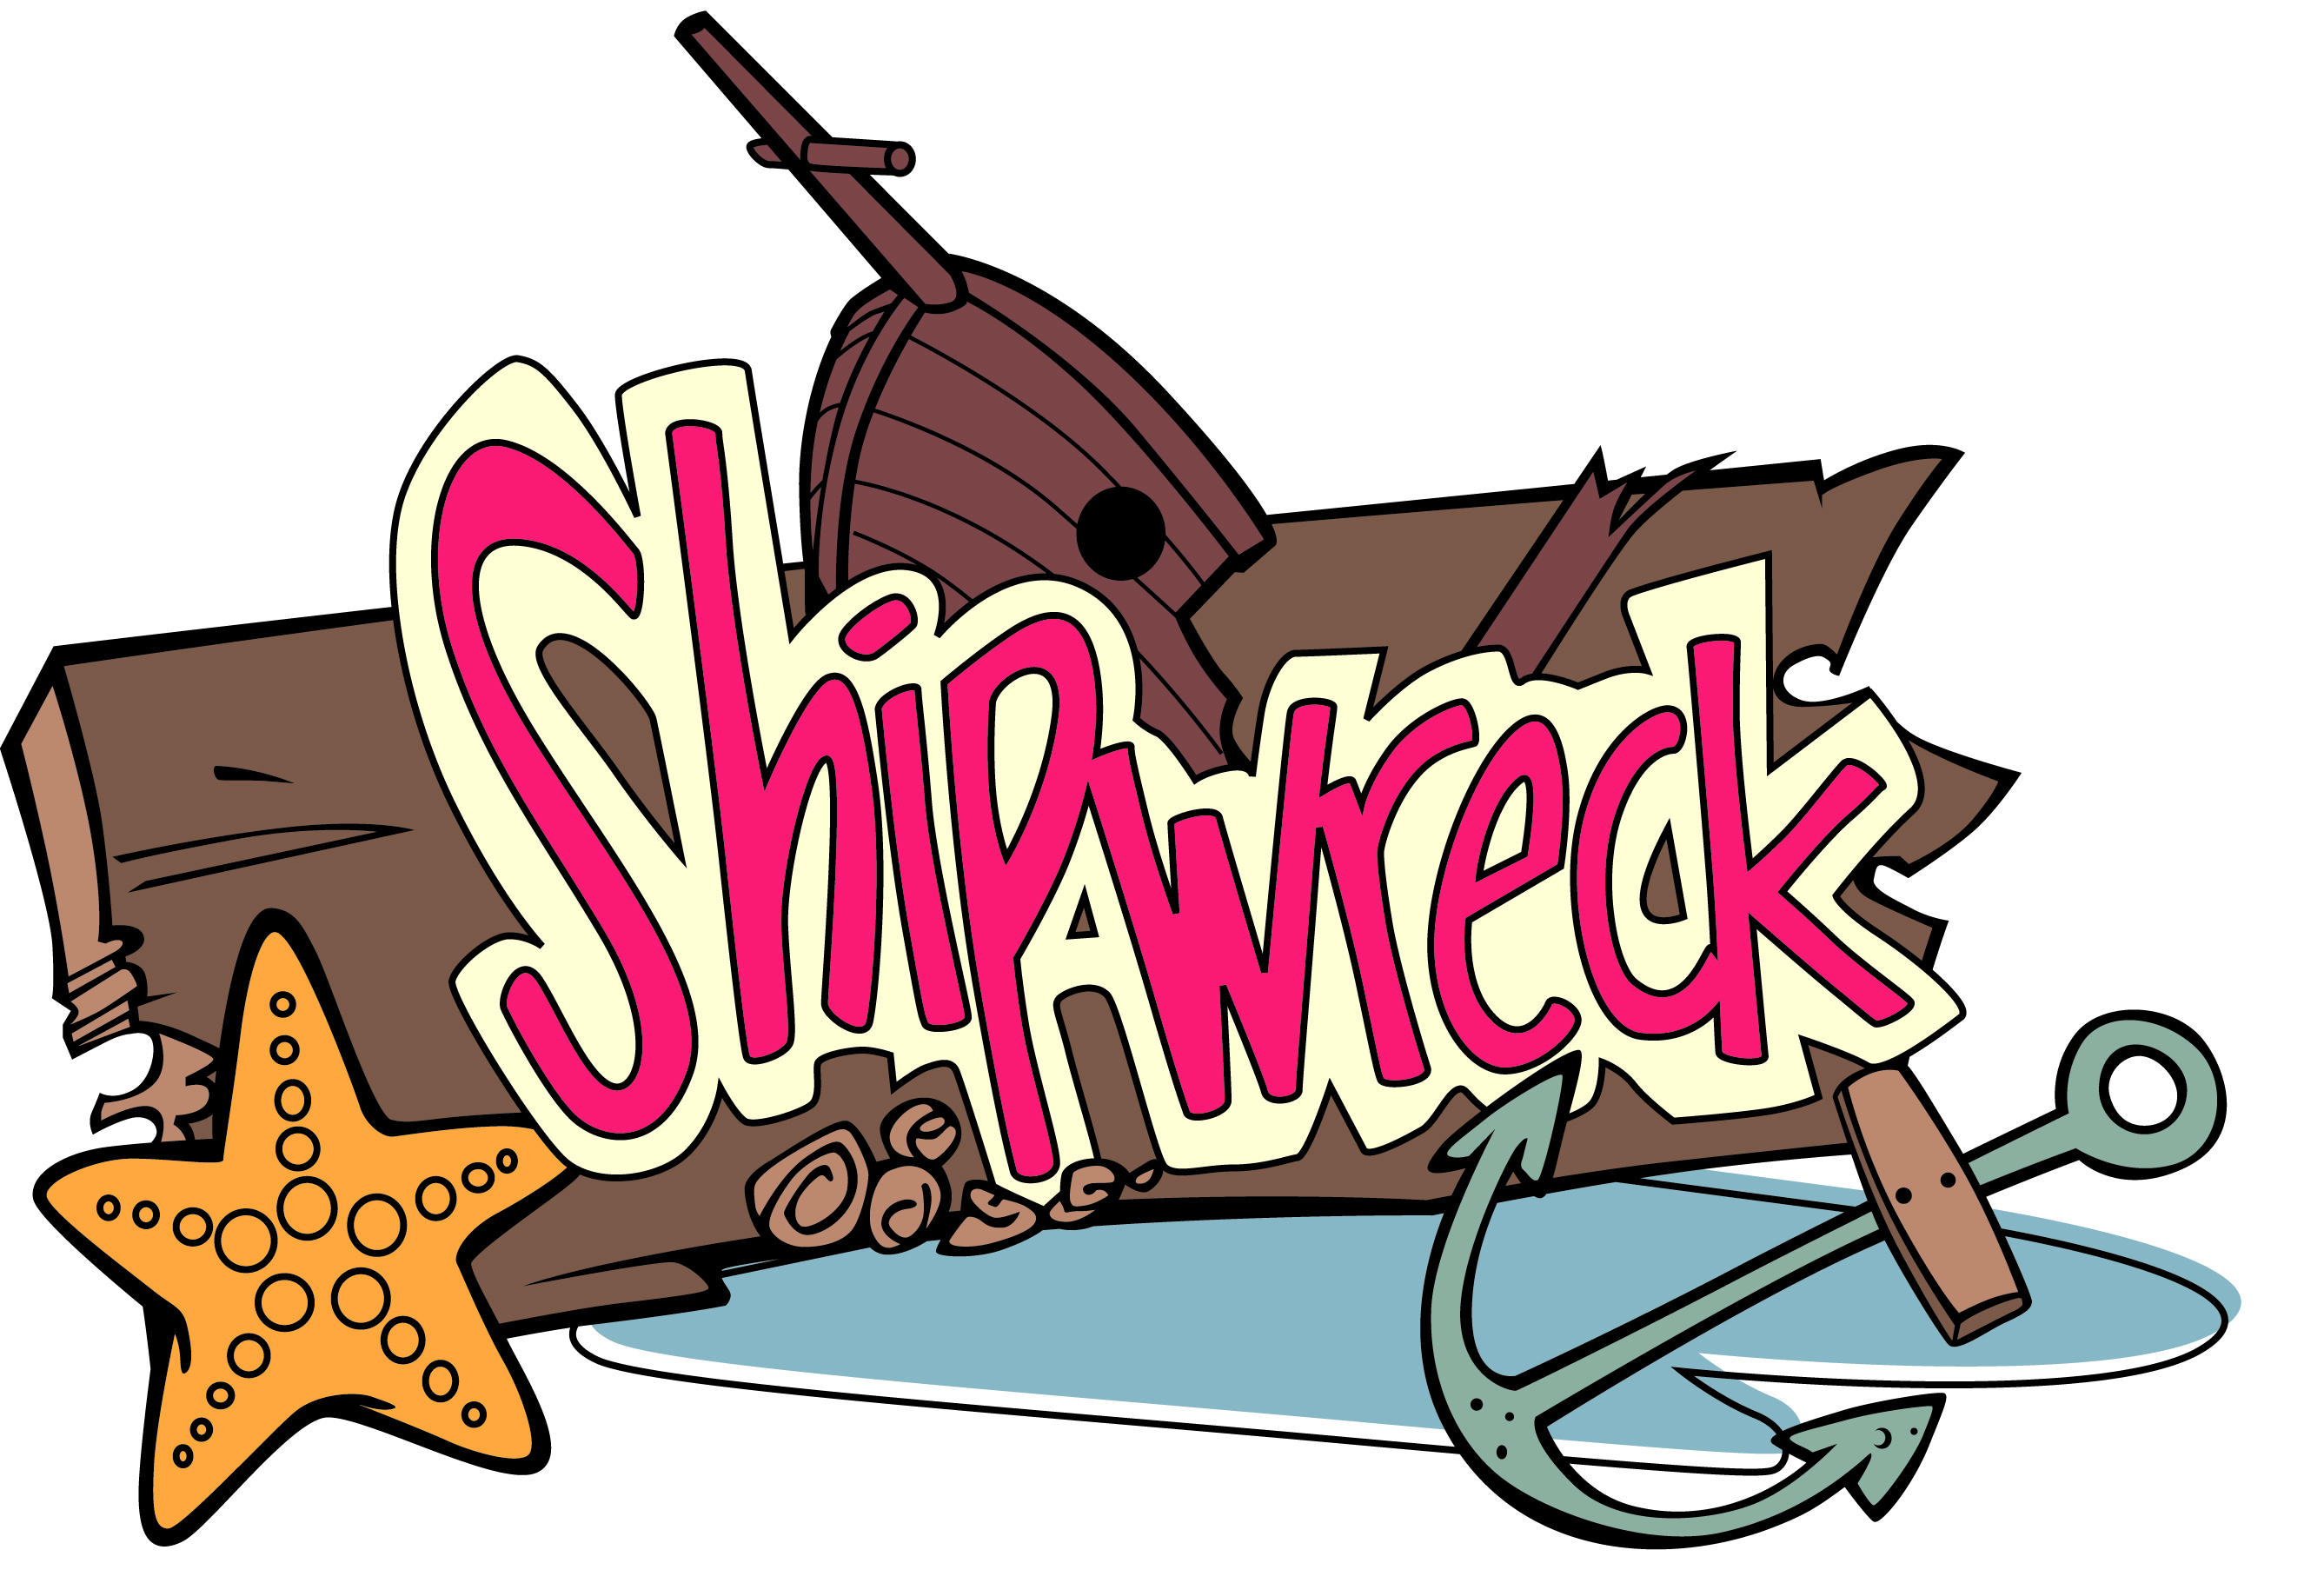 Shipwreck Party--August 15 - Pass Christian Yacht Club ...